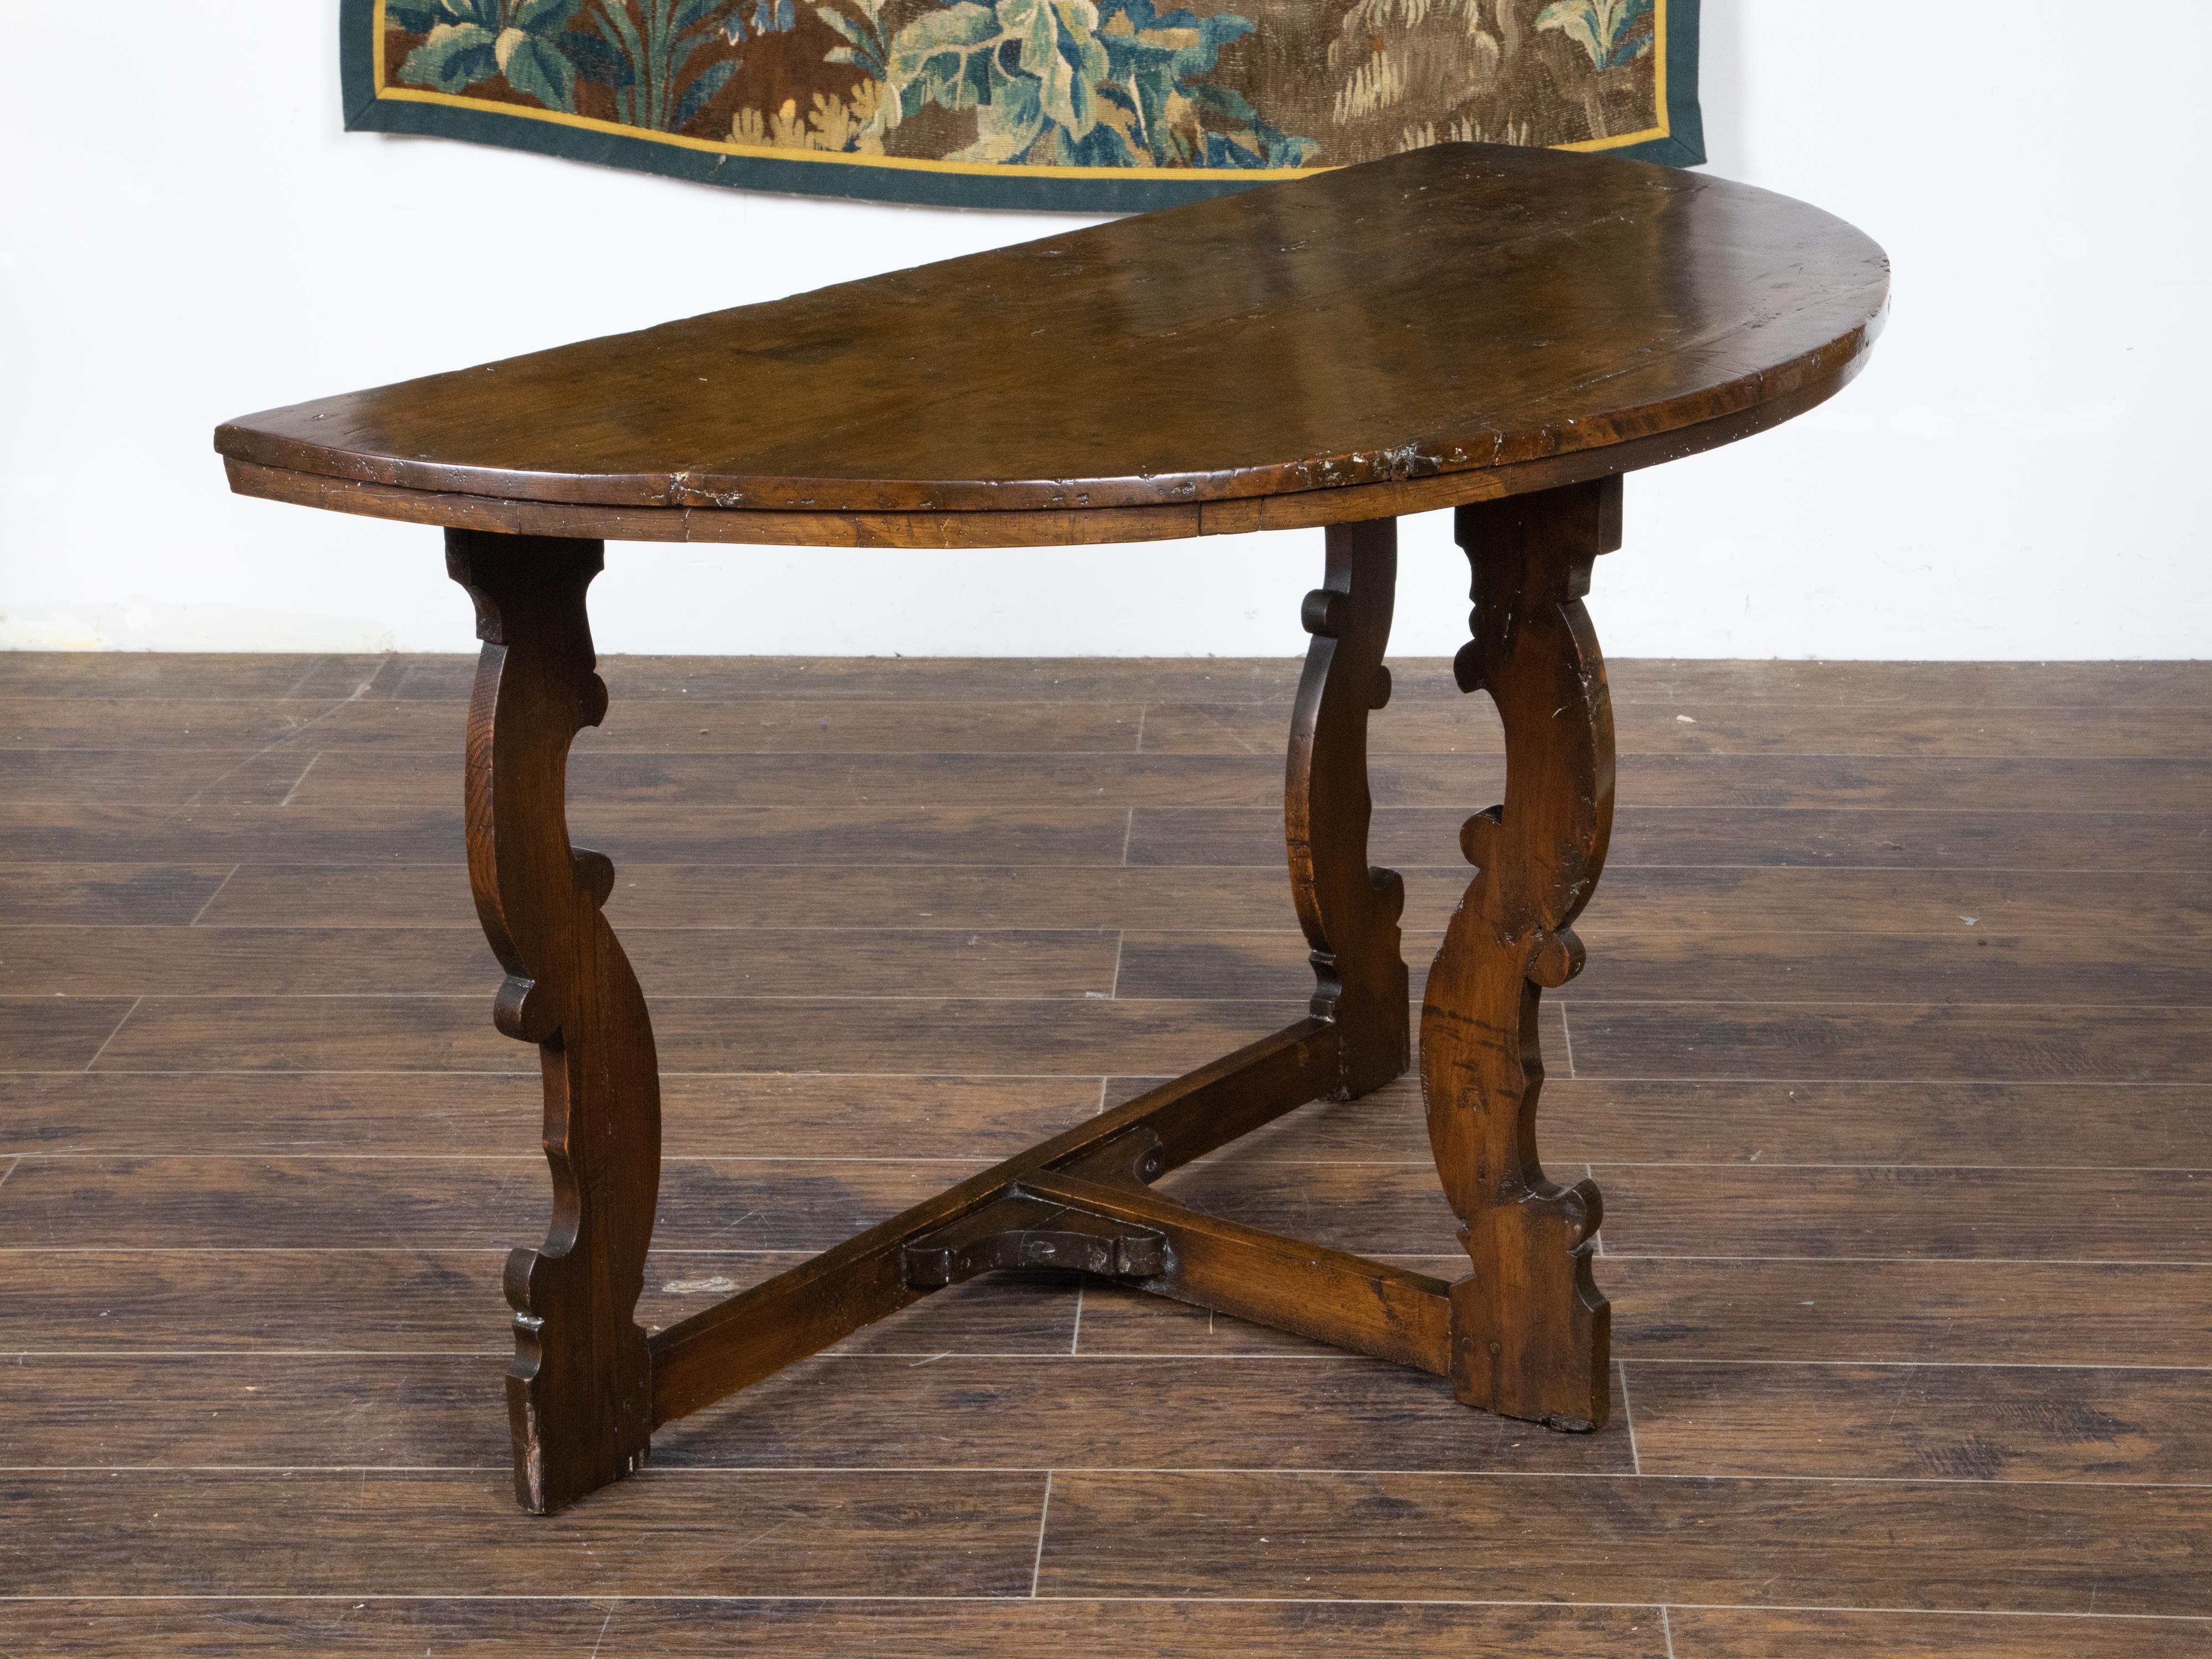 Large Italian Baroque Style 18th Century Walnut Demilune Table with Carved Legs For Sale 1